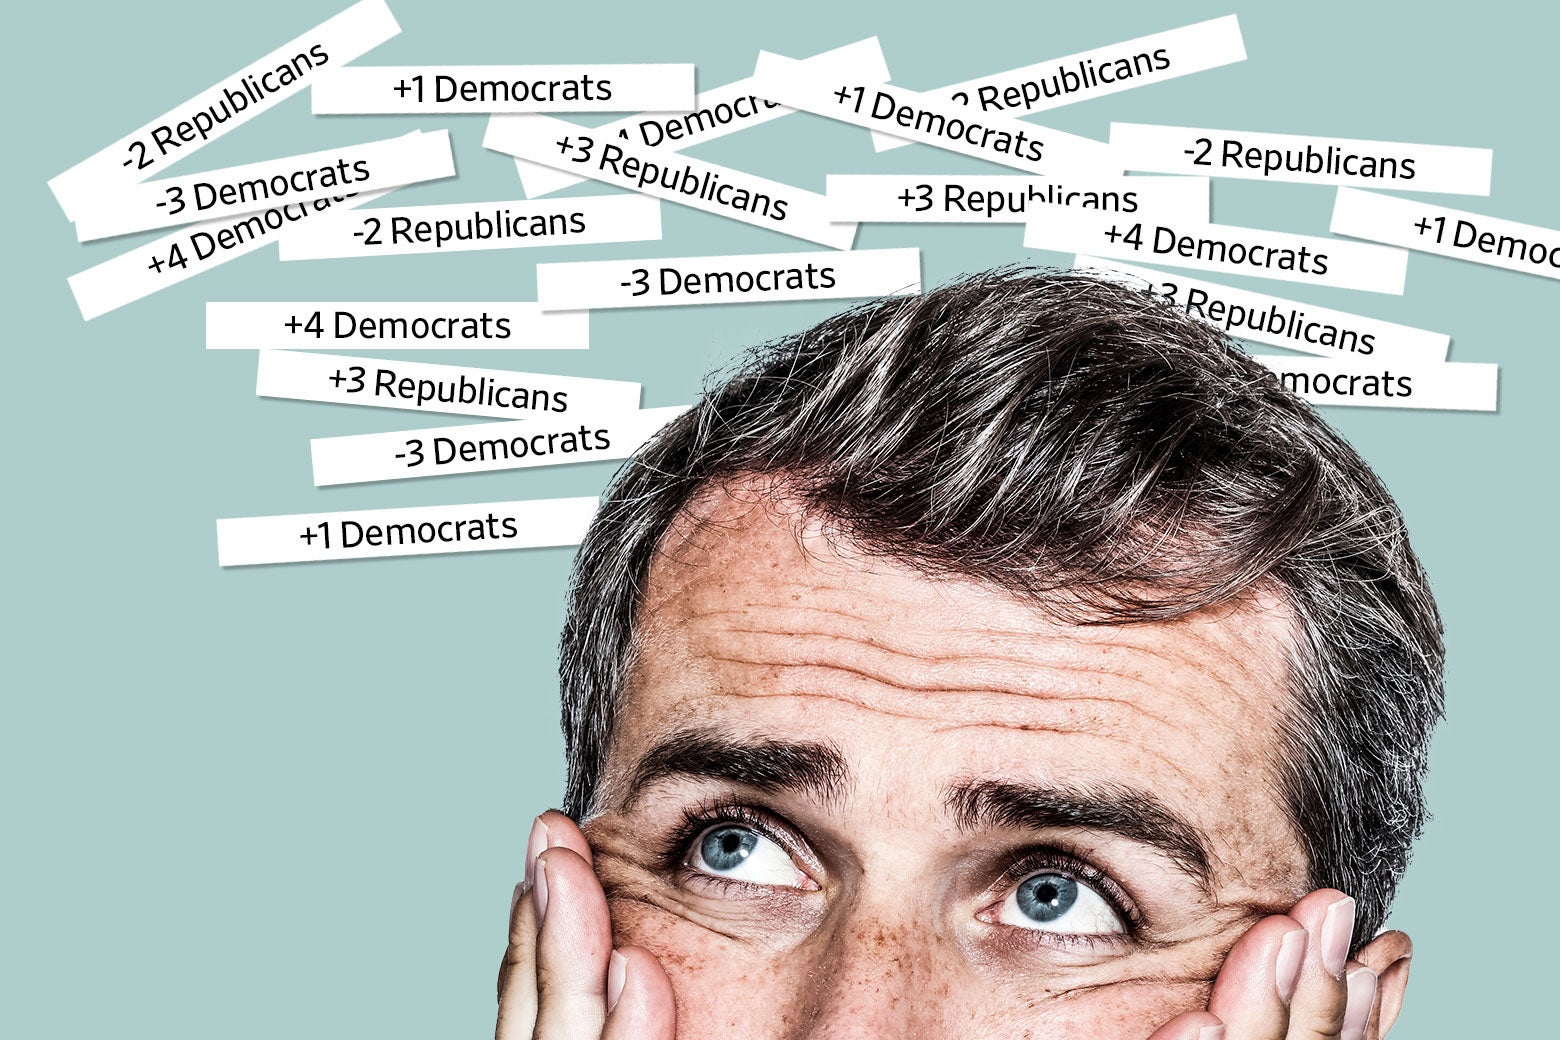 An exhausted looking man, seen only from the nose up, rests his head in his hands as he looks at a collage of ticker tape style images with varying electoral outcomes (Democrats +1, Republicans +2, and so forth) typed on them.